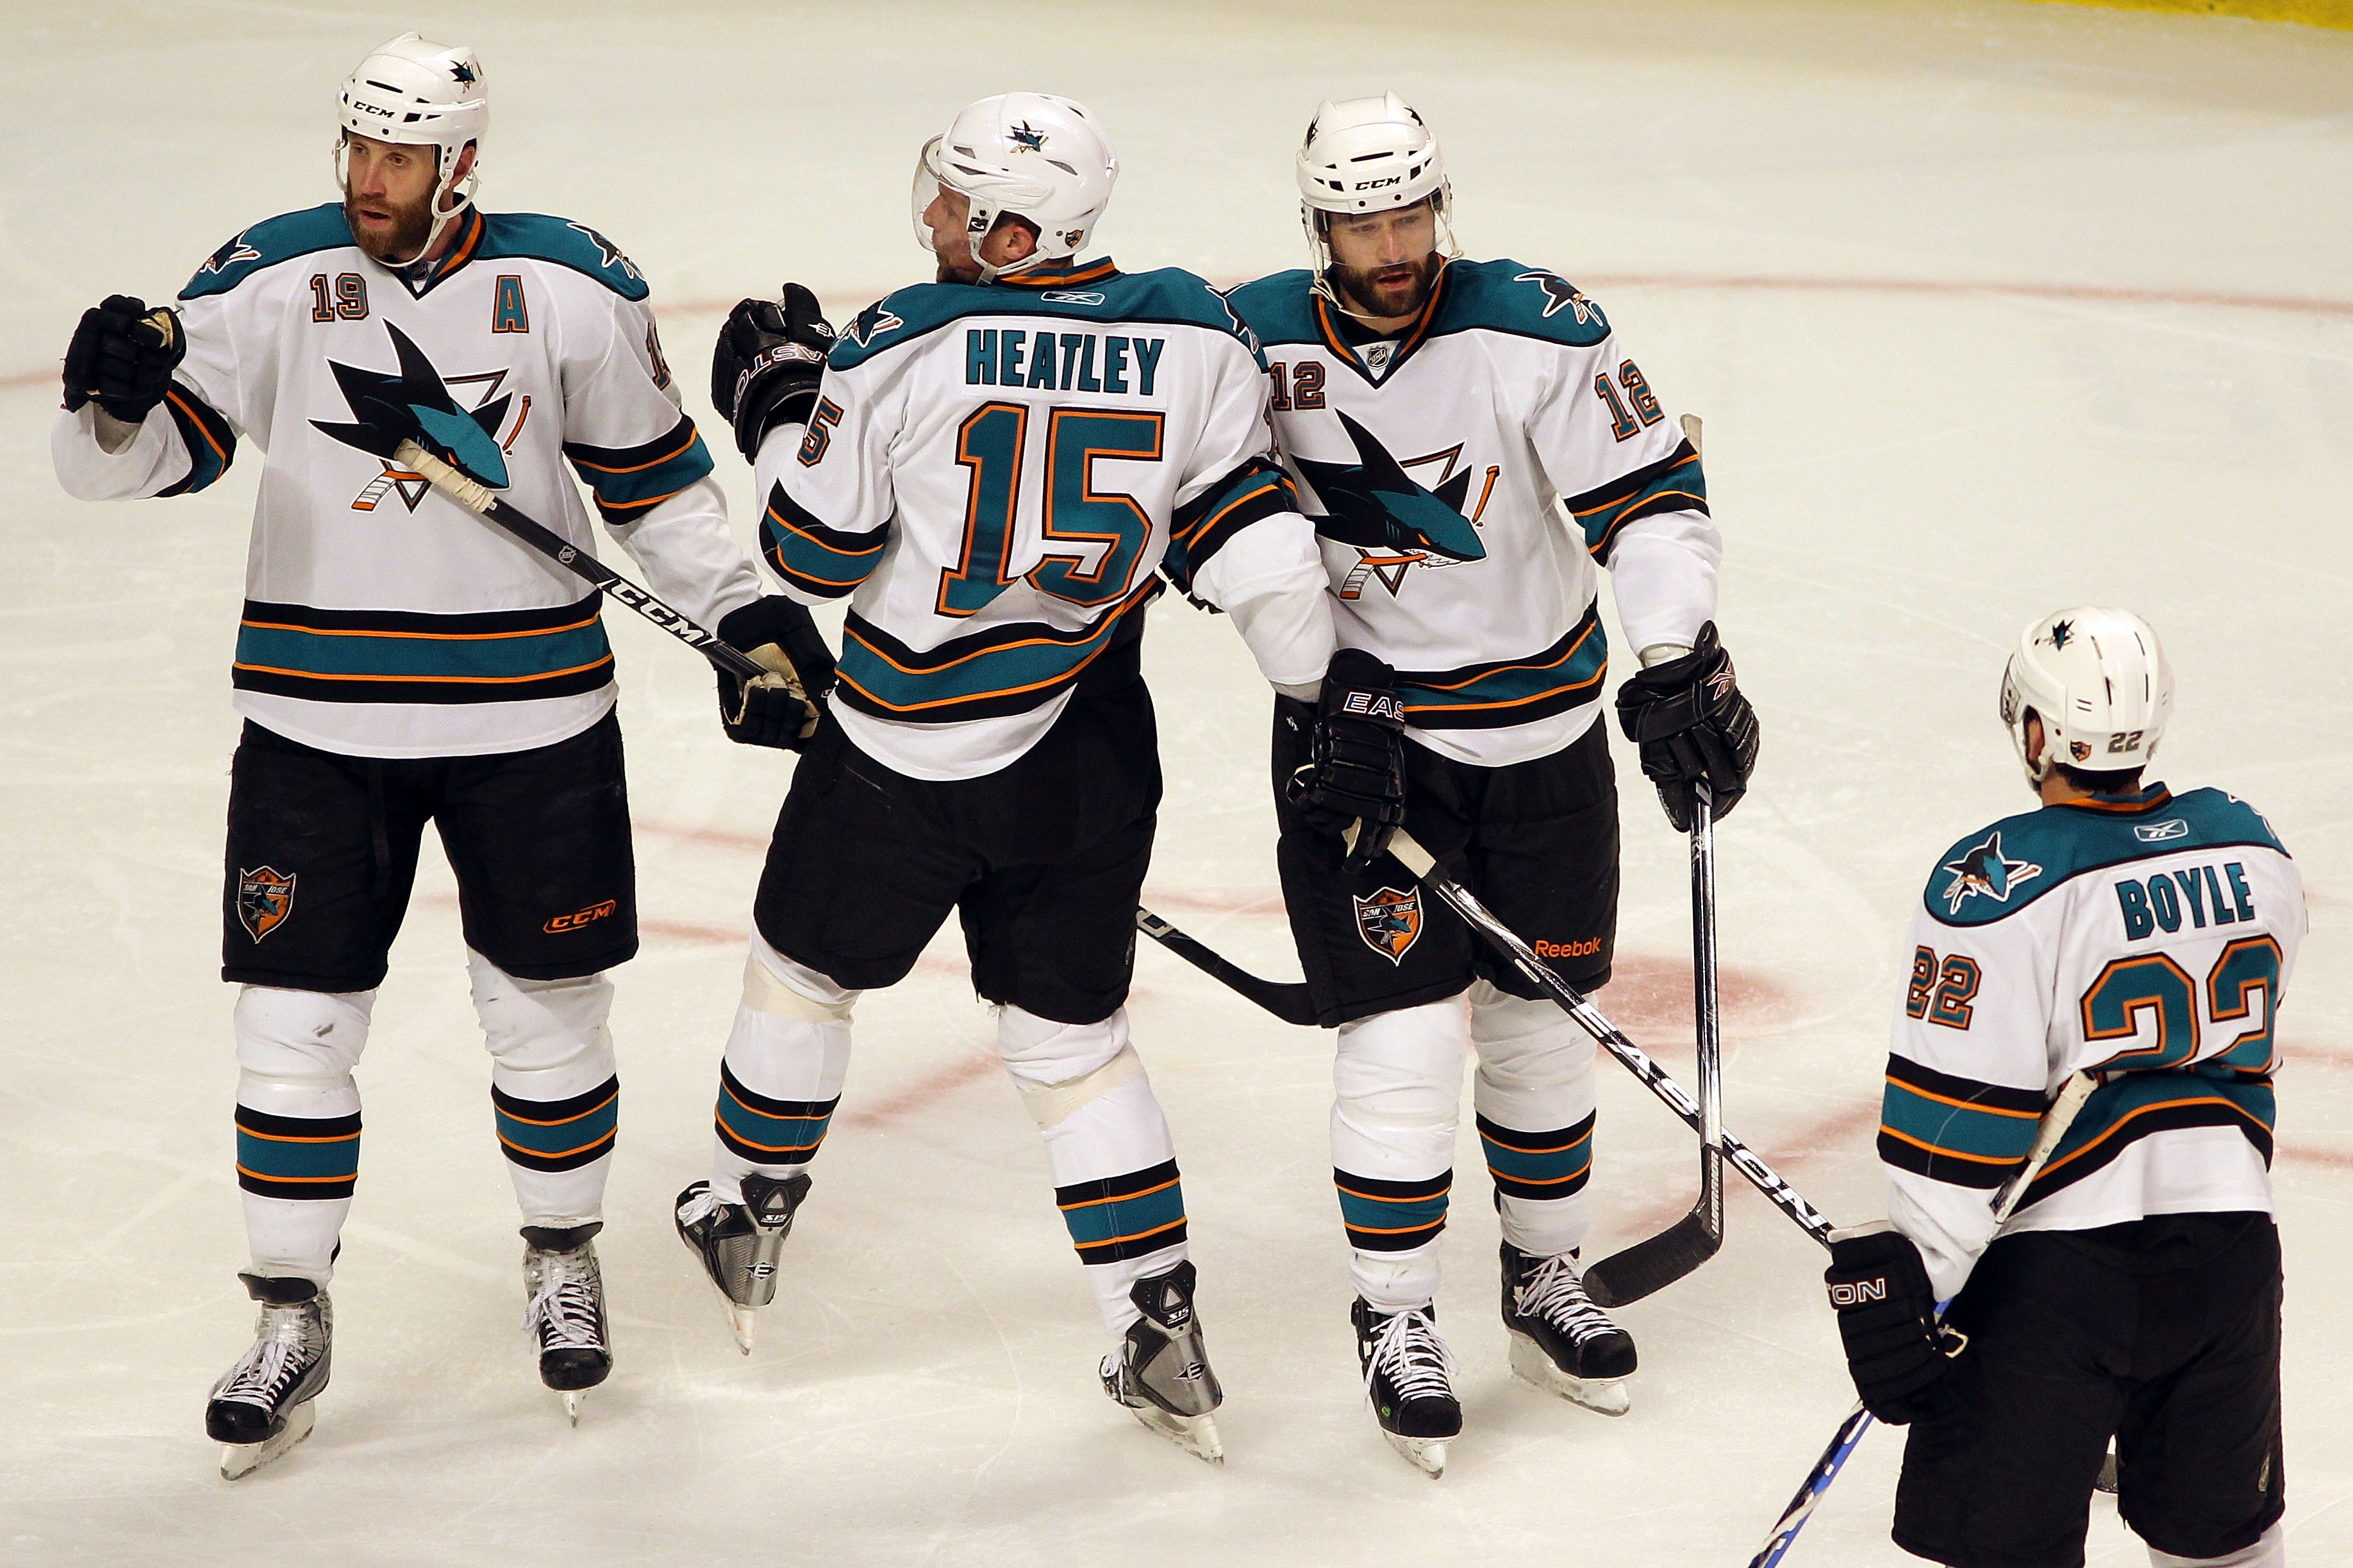 CHICAGO - MAY 21:  (L-R) Joe Thornton #19, Dany Heatley #15, Patrick Marleau #12 and Dan Boyle #12 of the San Jose Sharks react after the second period goal by Marleau while taking on the Chicago Blackhawks in Game Three of the Western Conference Finals d